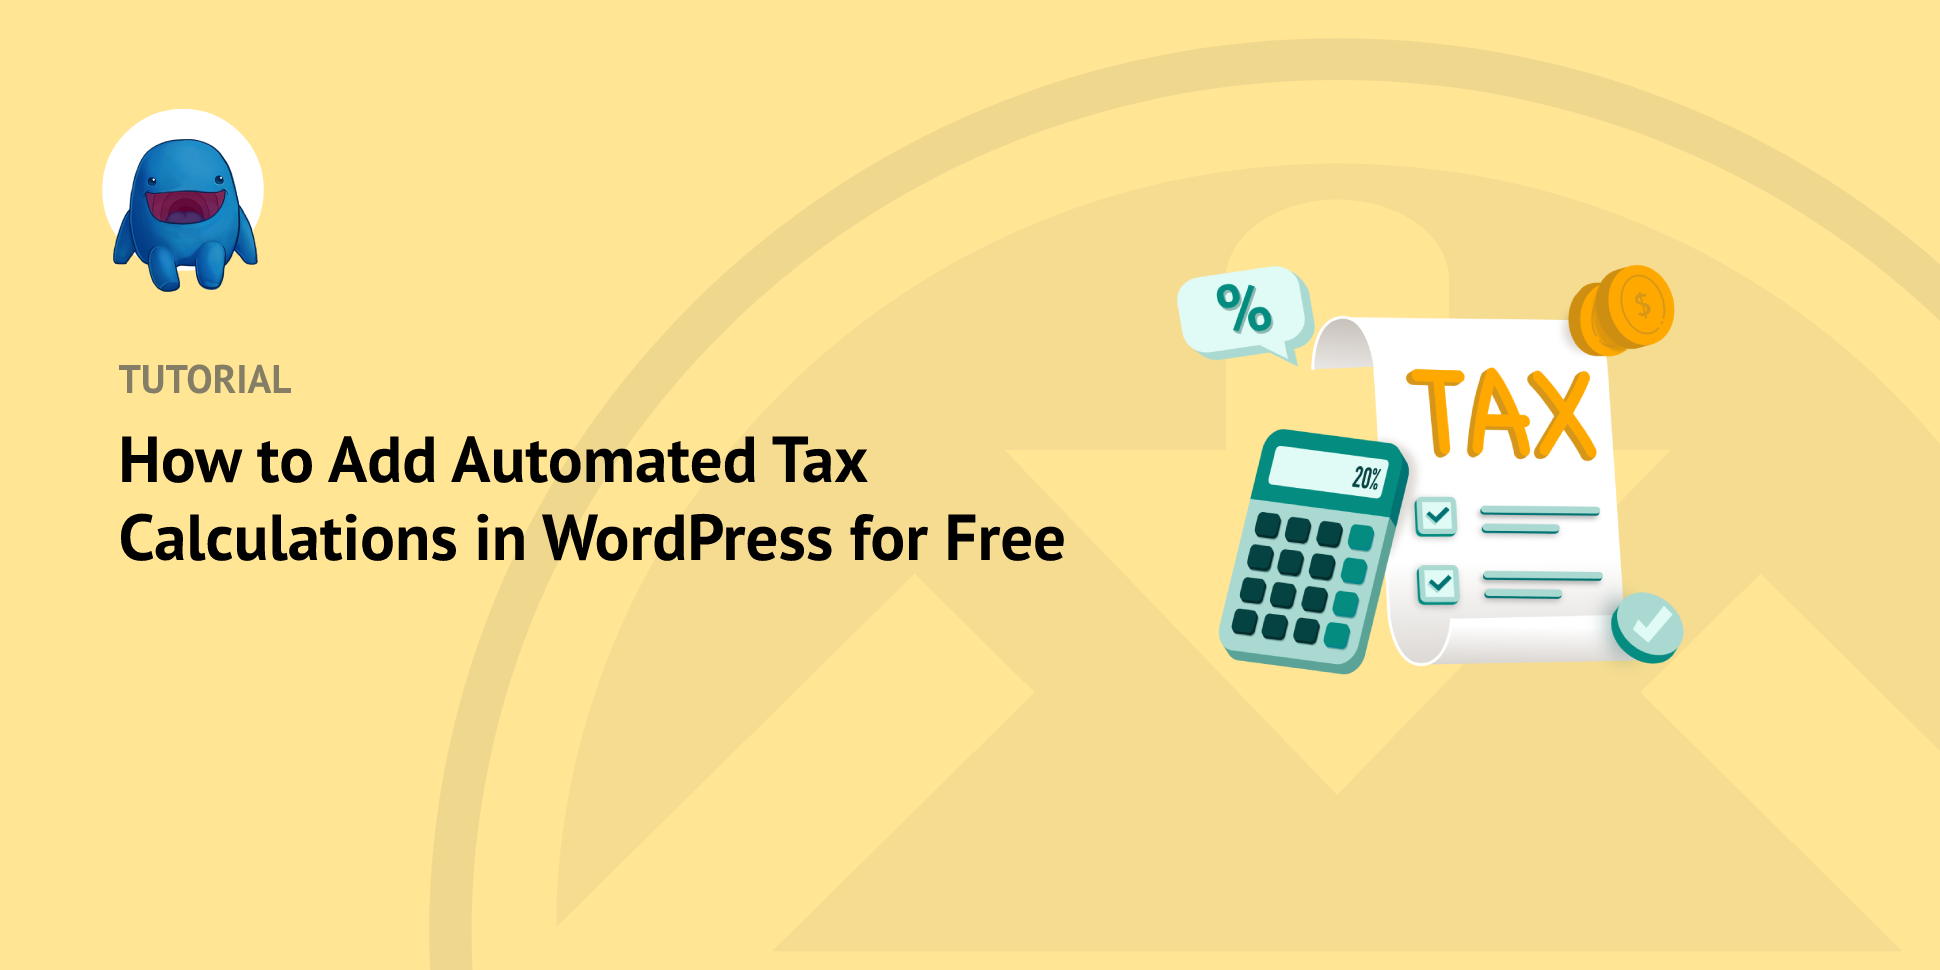 How to Add Automated Tax Calculations in WordPress for FREE